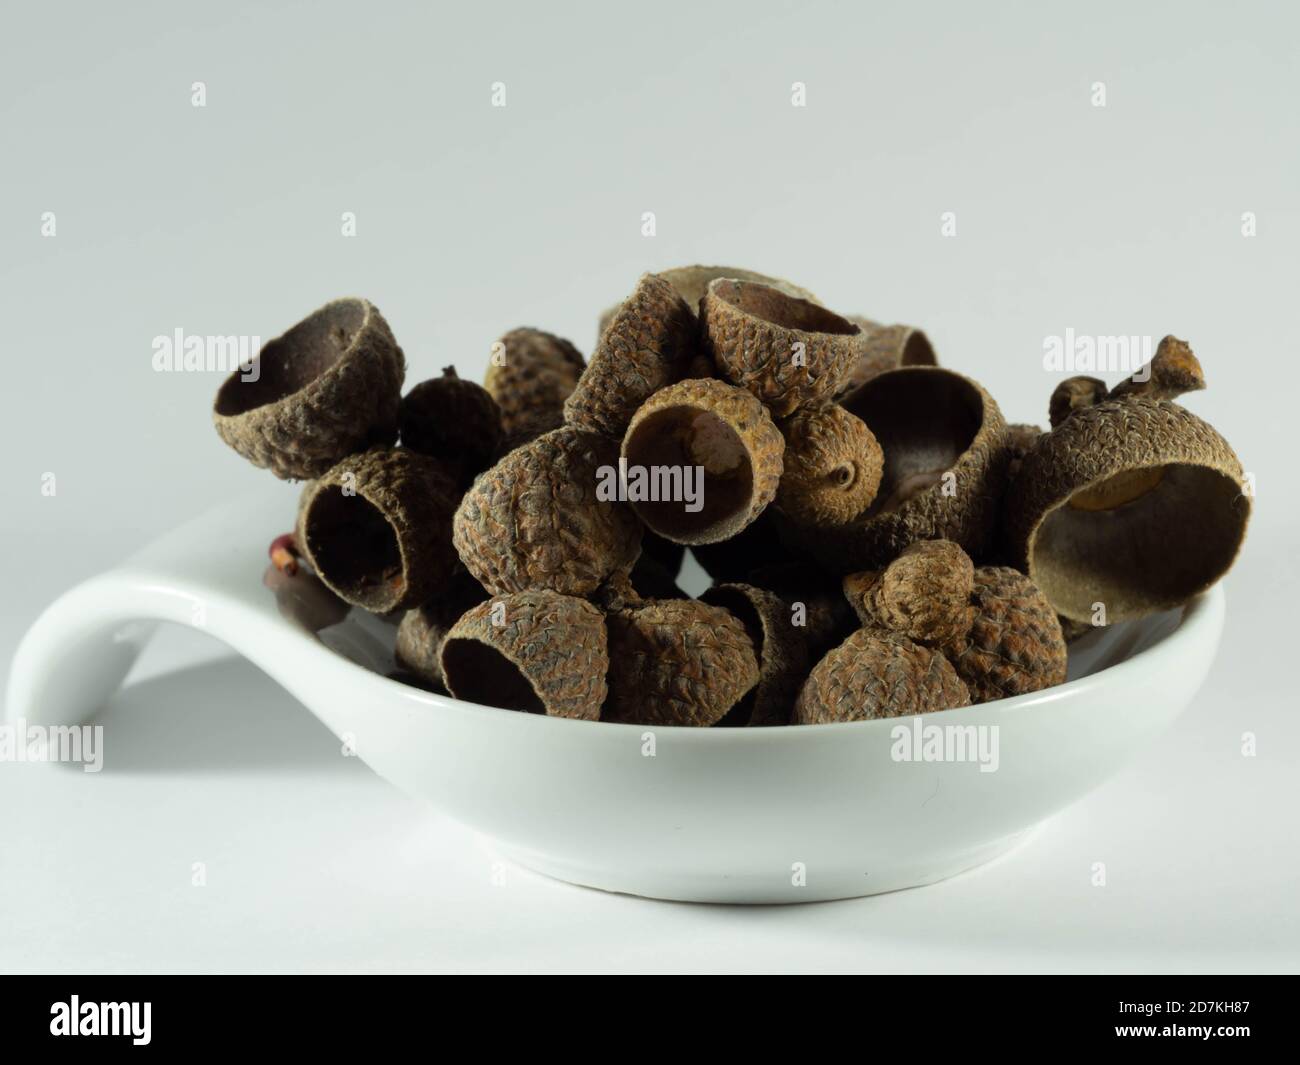 A white cup filled with acorn. Stock Photo